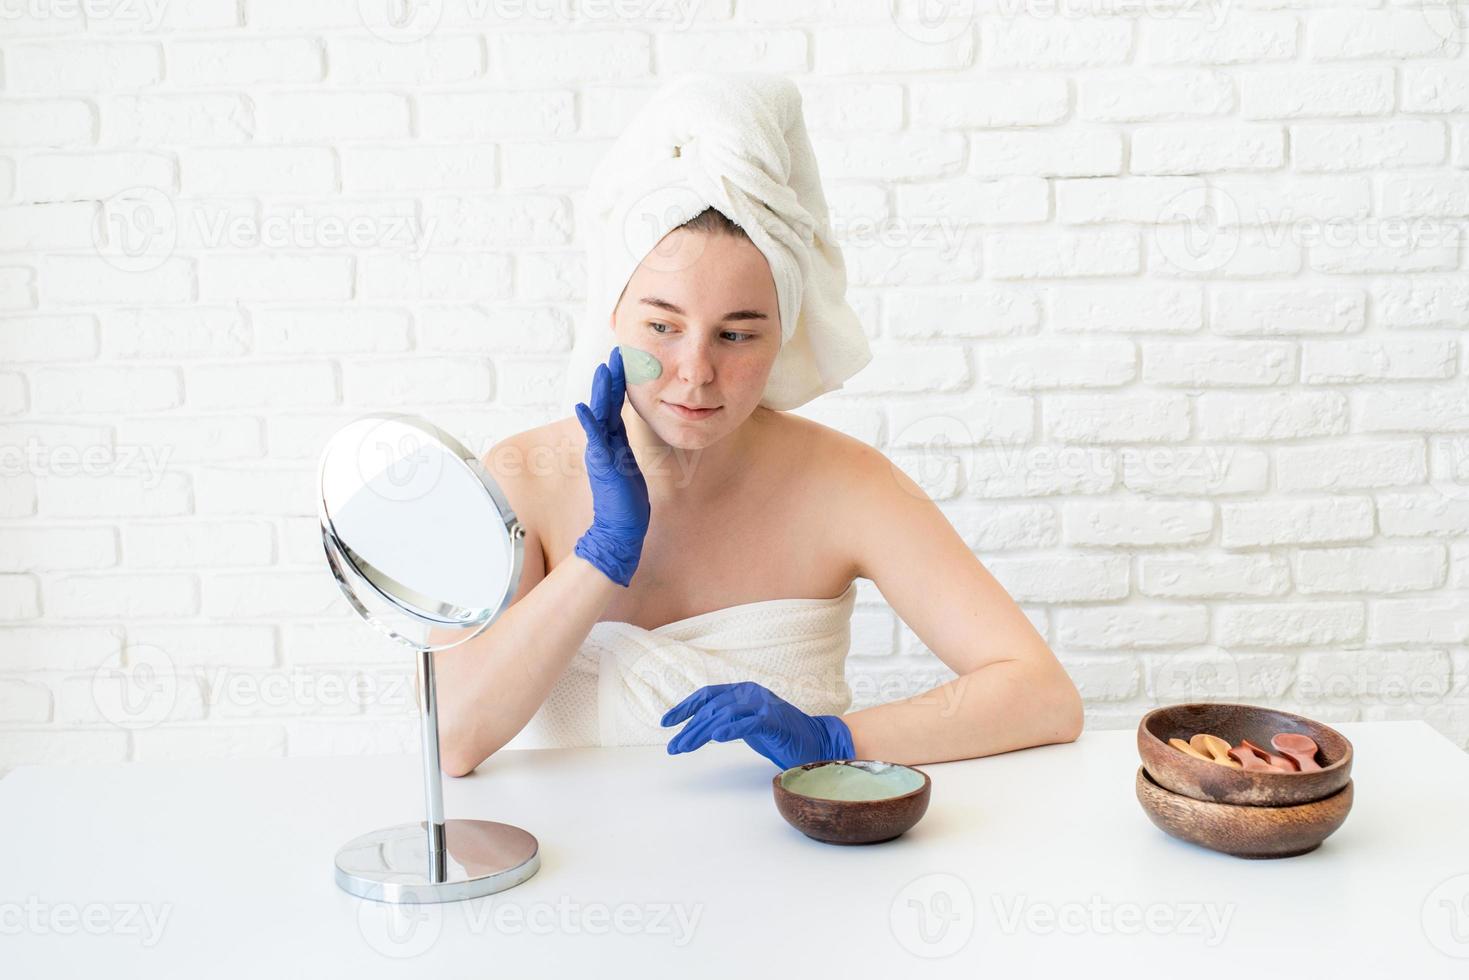 Woman wearing gloves applying clay face mask looking at the mirror photo